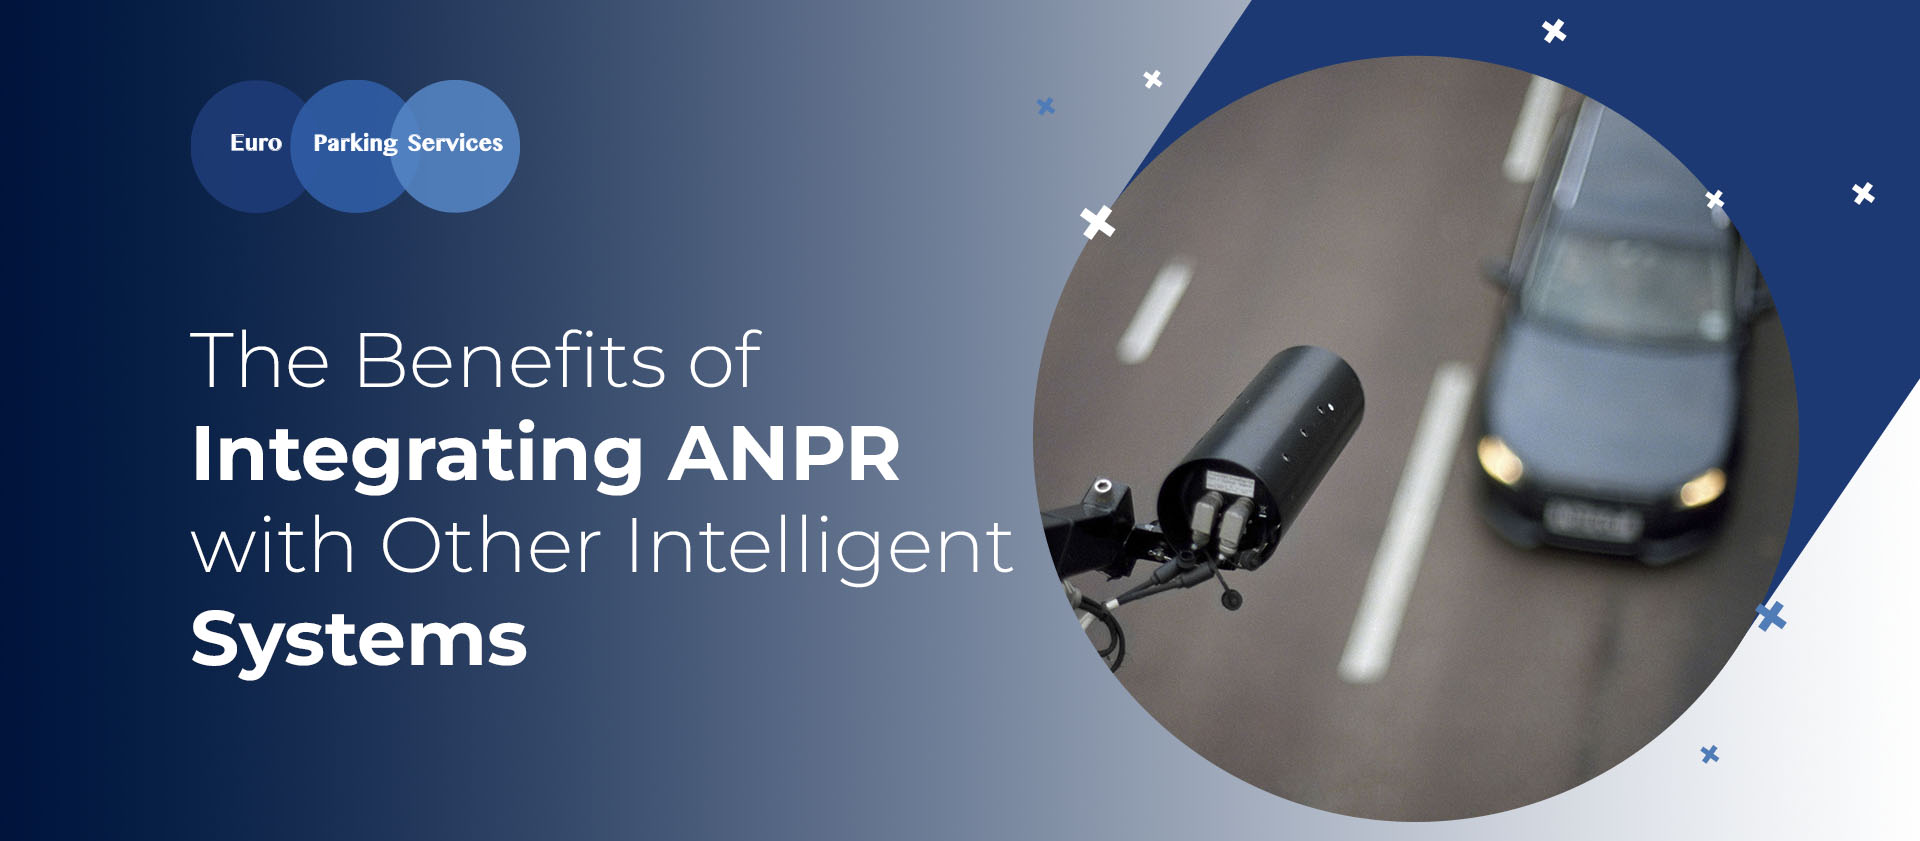 The Benefits of Integrating ANPR with Other Intelligent Systems